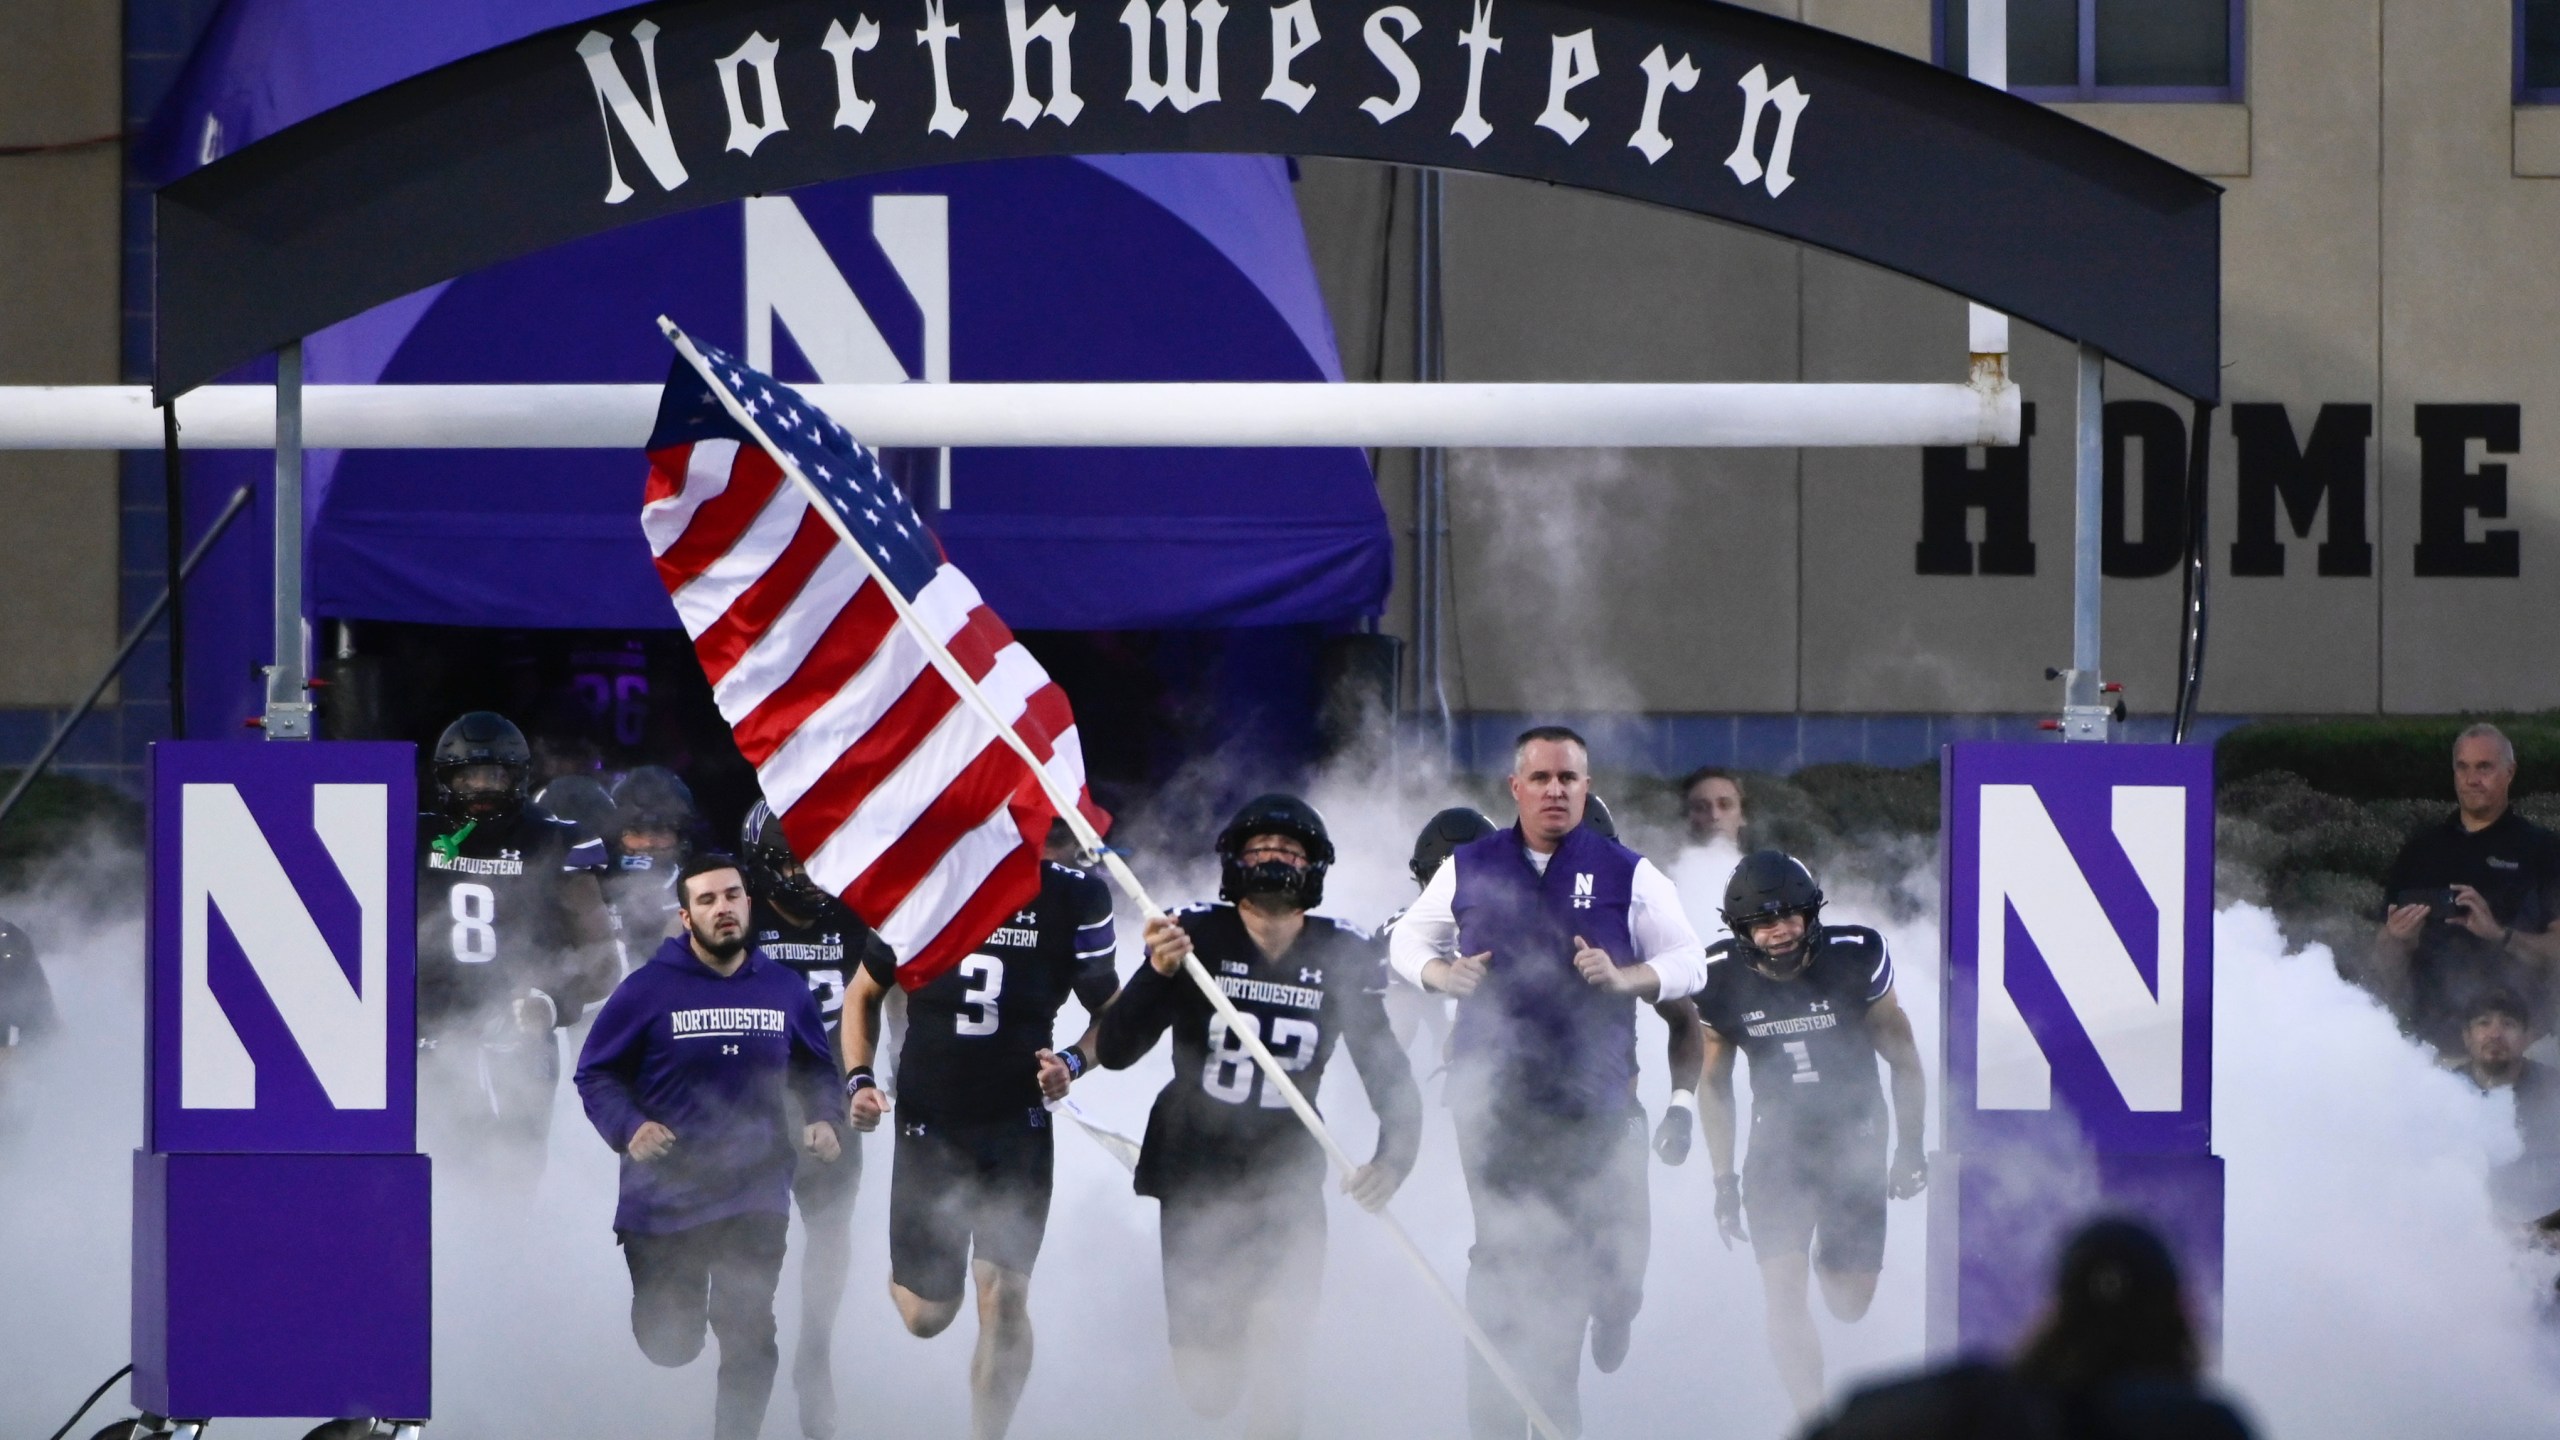 FILE - Northwestern coach Pat Fitzgerald, right, leads the team onto the field for the team's NCAA college football game against Miami (Ohio) on Sept. 24, 2022, in Evanston, Ill. Approximately 1,000 former Northwestern University athletes sent a letter, obtained by The Associated Press on Thursday, Aug. 17, 2023, condemning hazing while defending the school's culture, saying allegations of abuse within the football program and other men's and women's teams do not reflect their experiences. Coach Fitzgerald was fired in July 2023 after 17 seasons amid the hazing scandal. (AP Photo/Matt Marton, File)